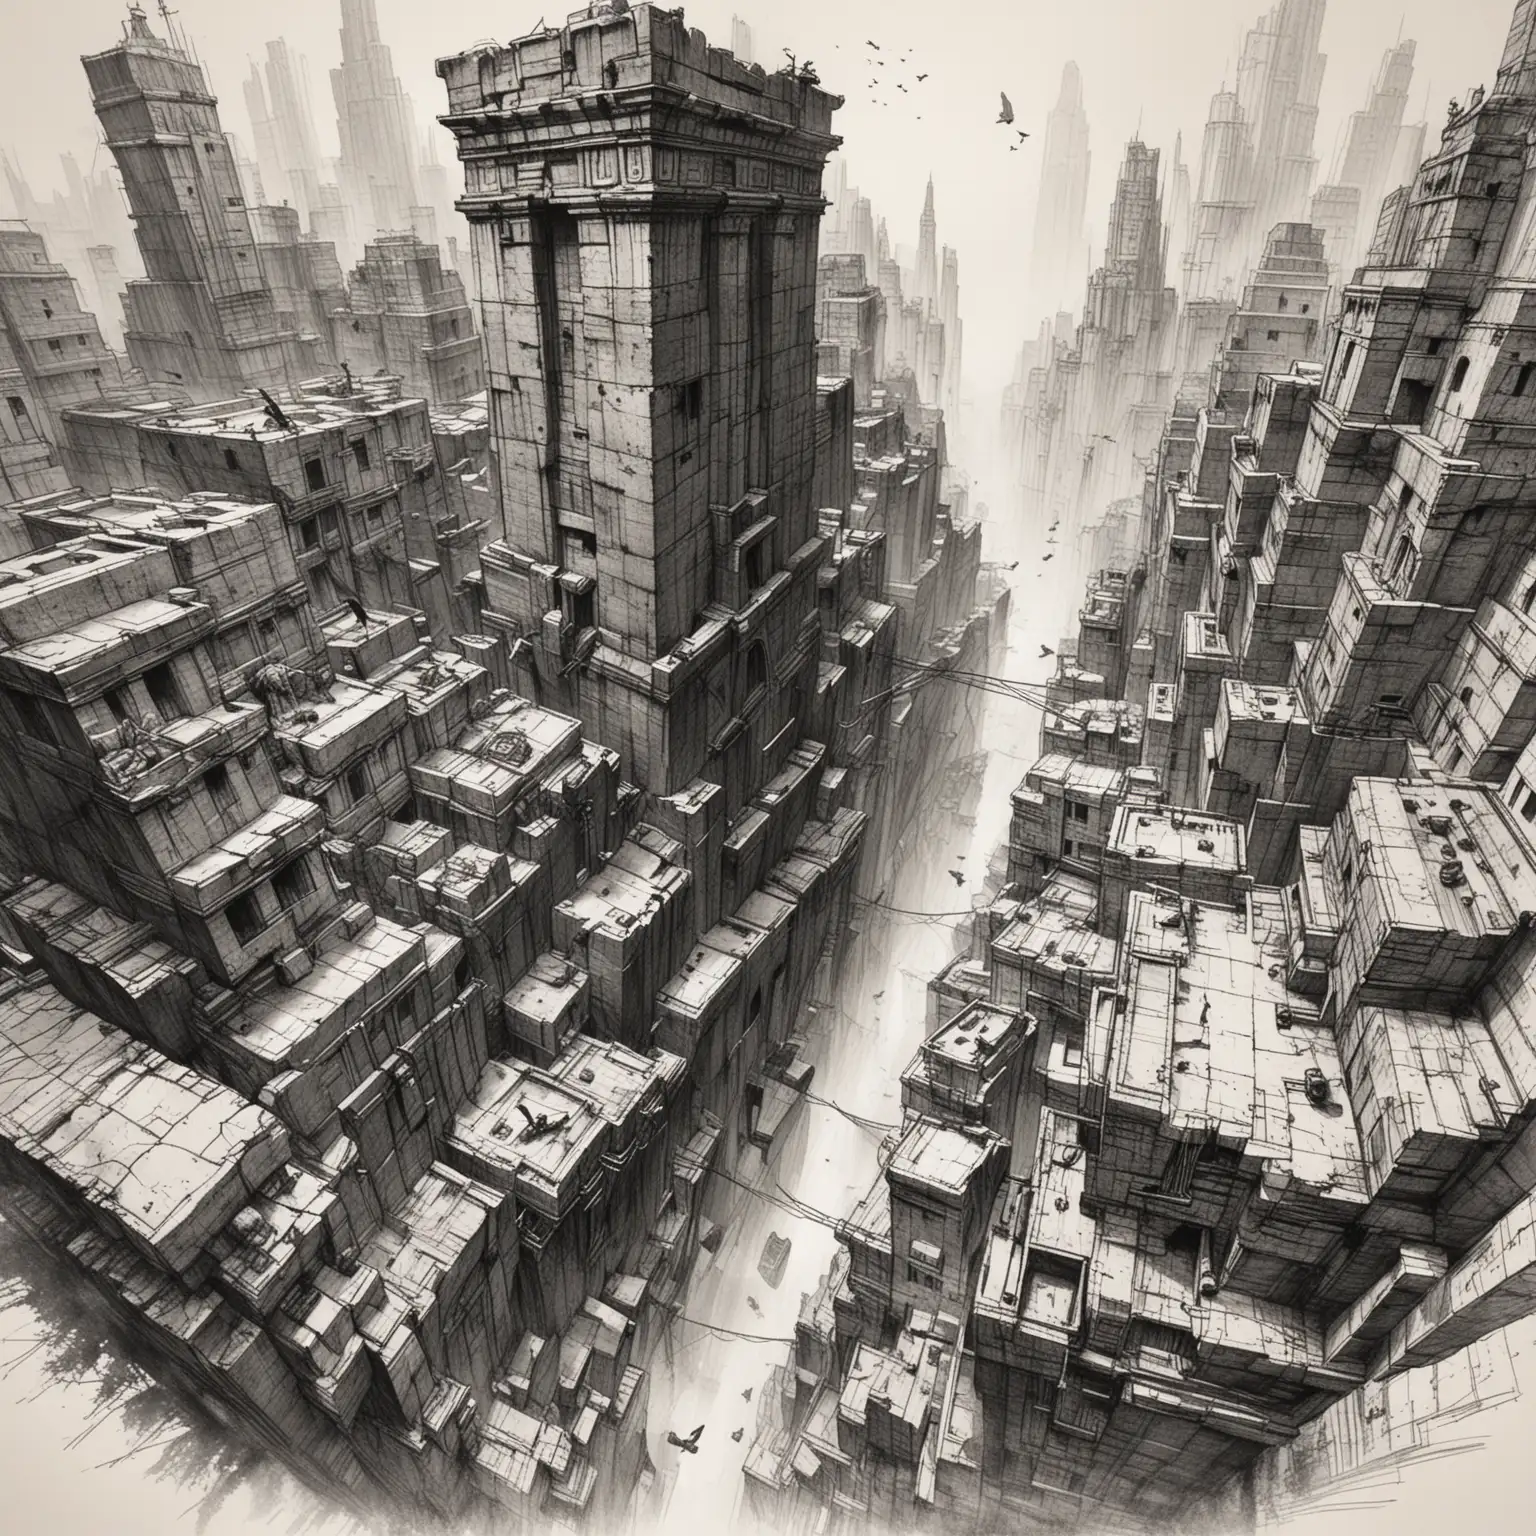 3 point perspective city sketch explorer  tomb raider style, birds eye view